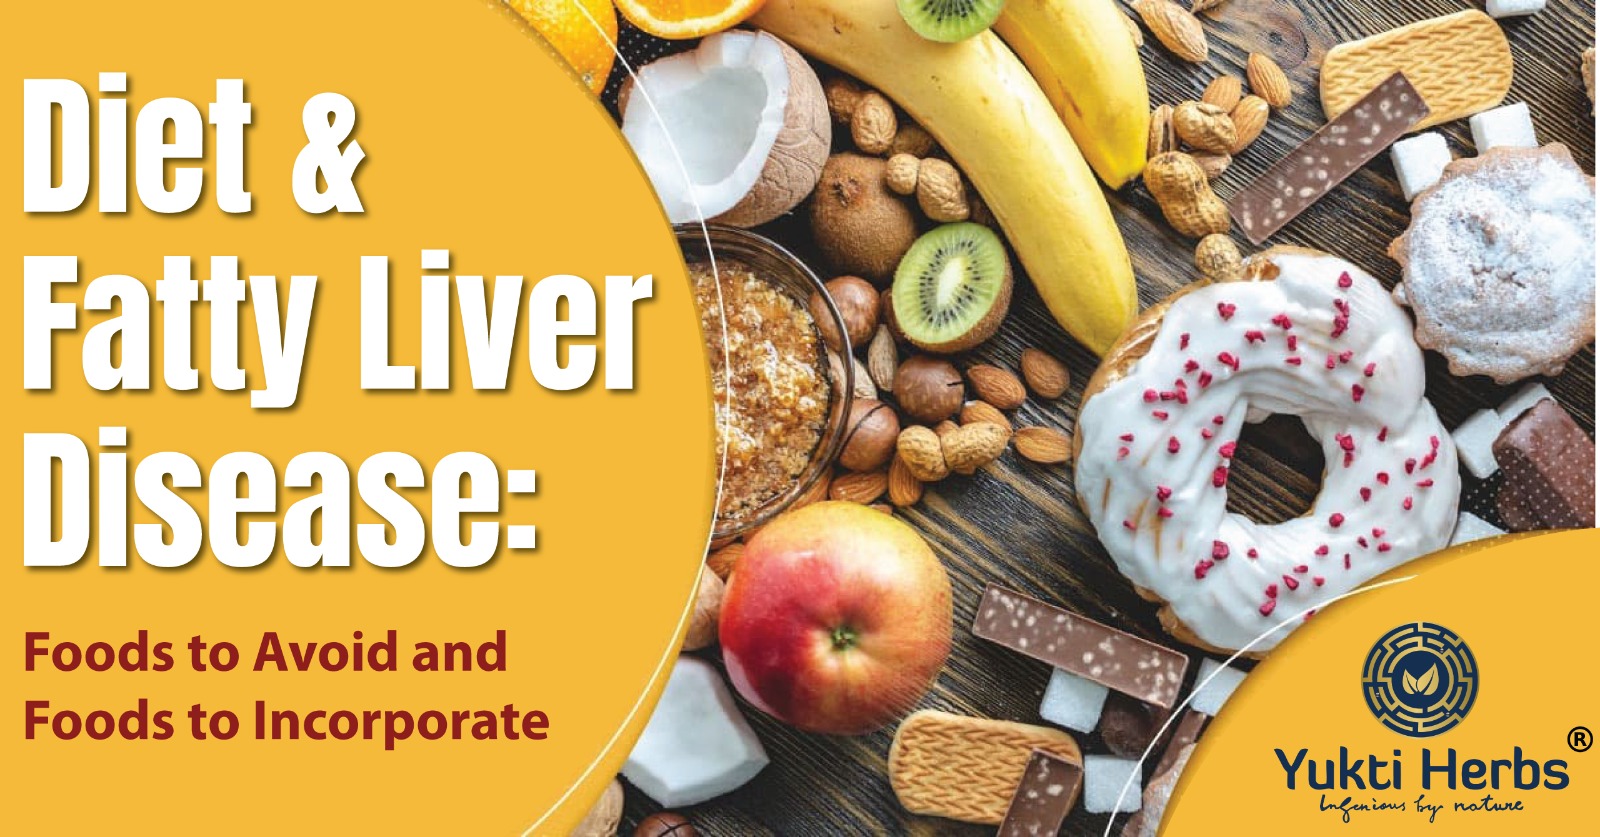 Diet and Fatty Liver Disease